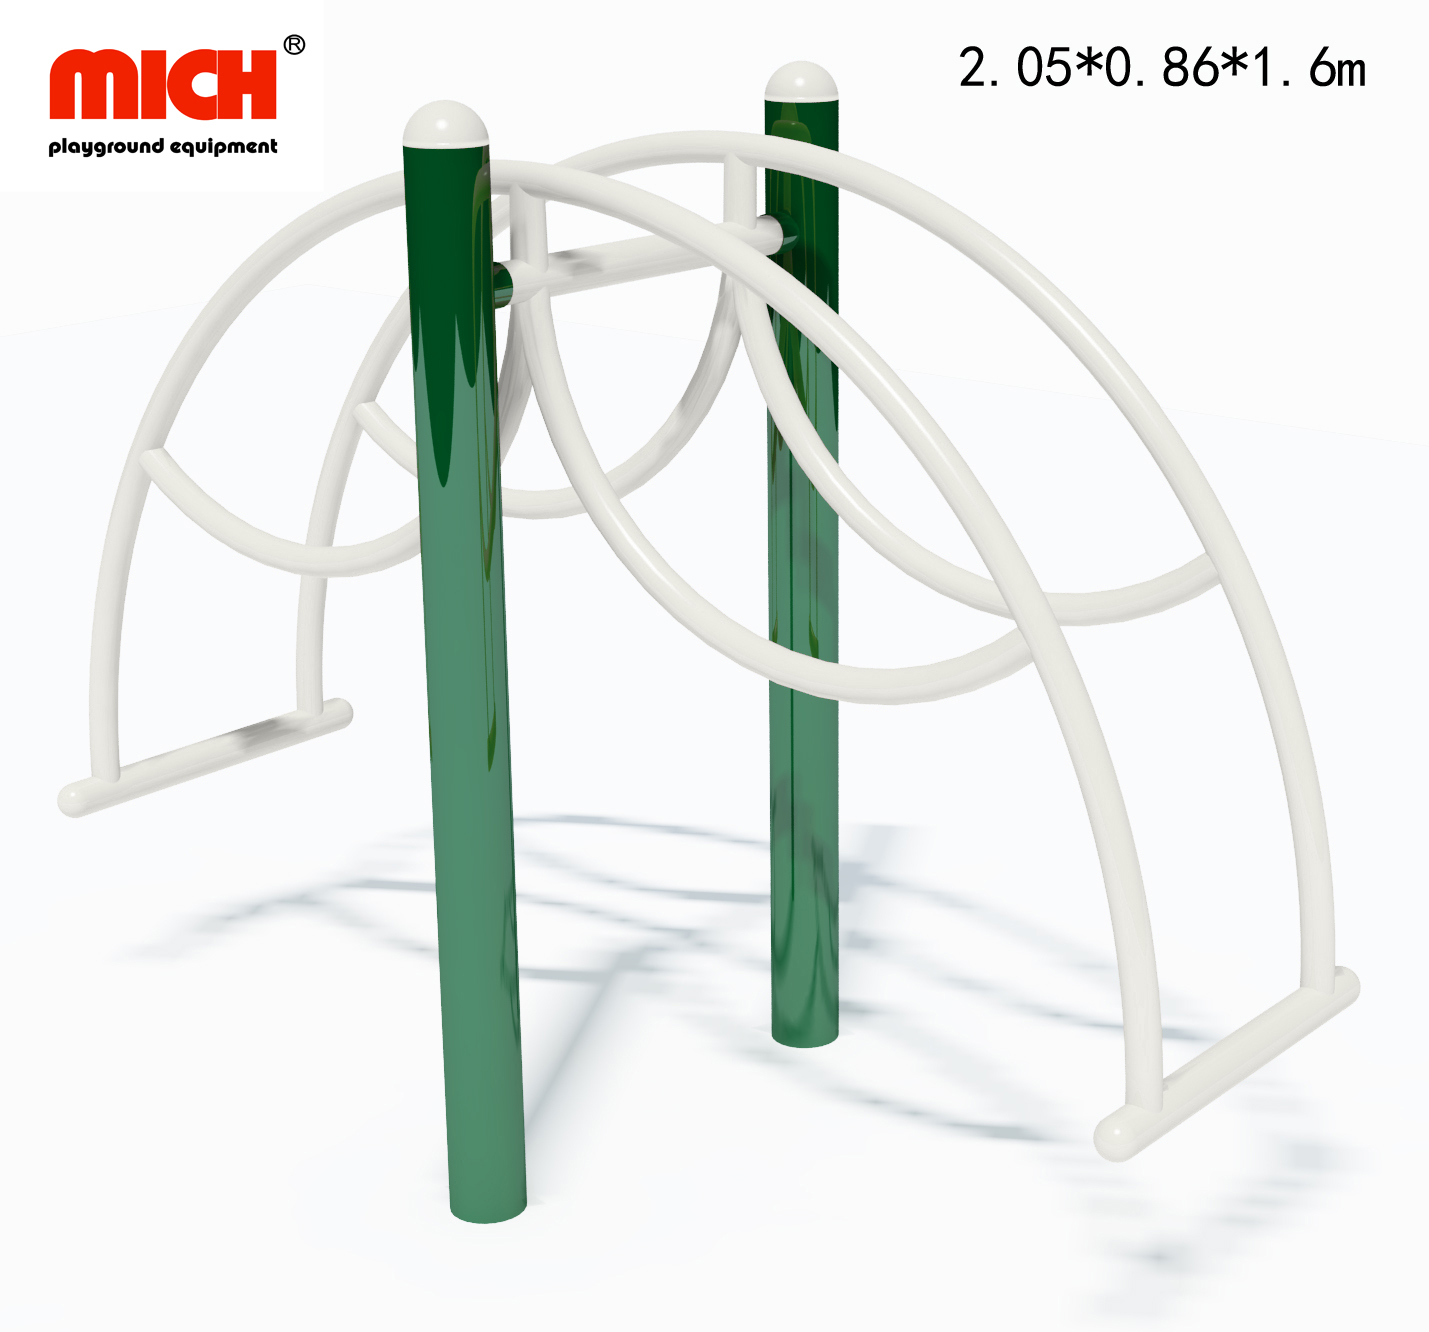 How to choose and configure outdoor fitness equipment?